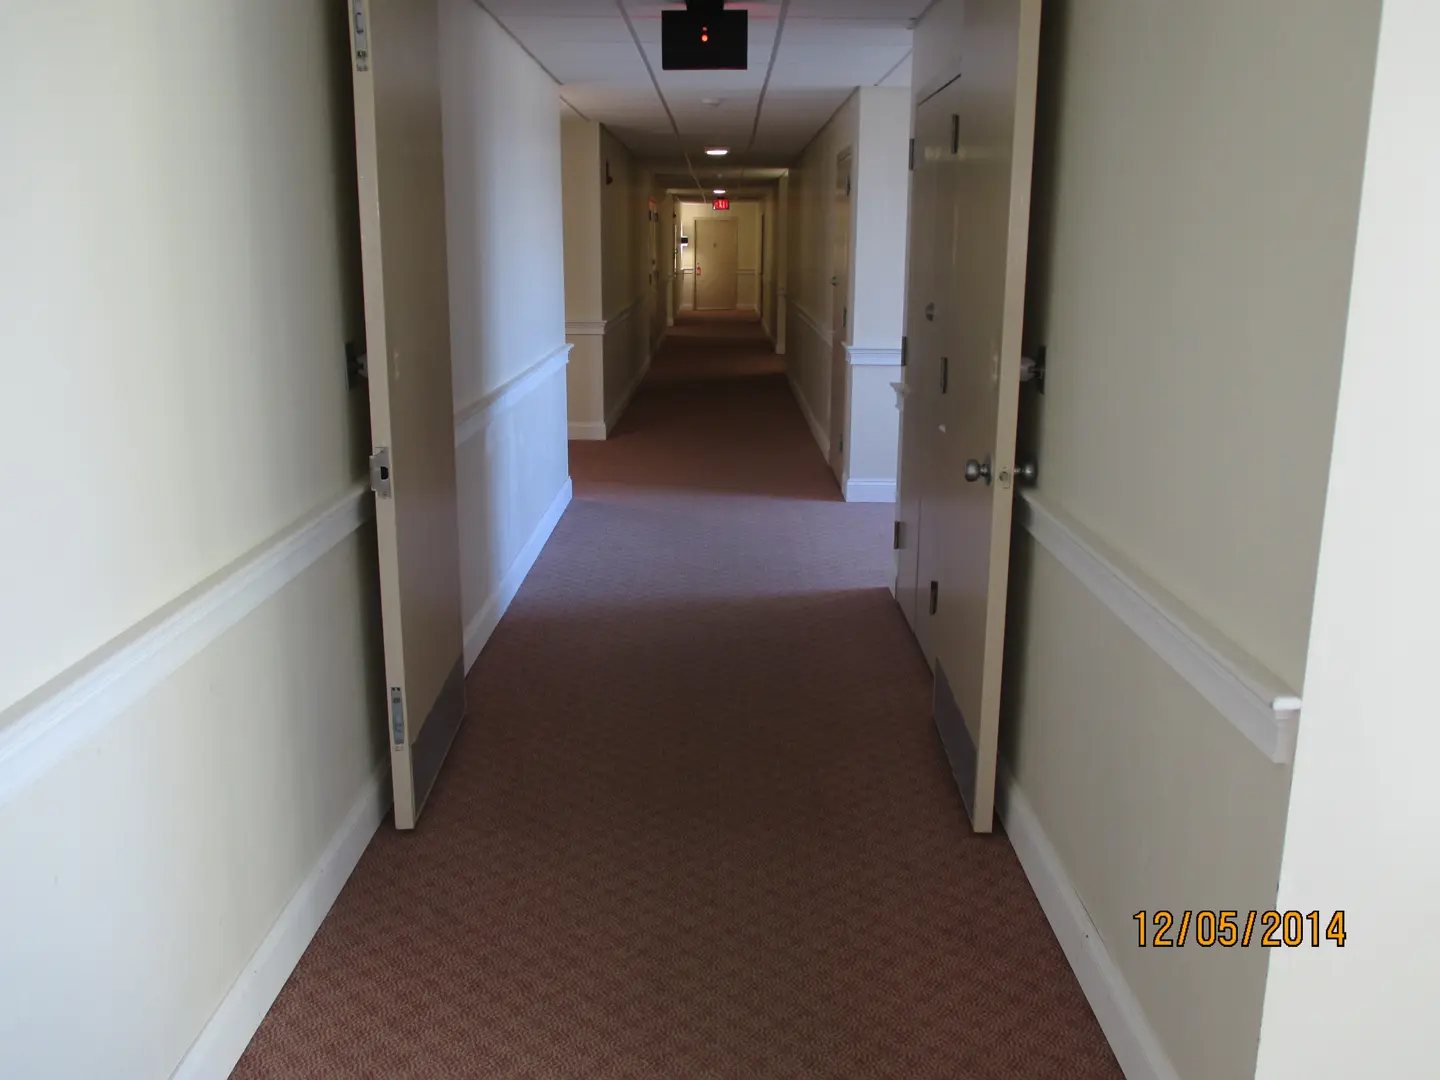 A hallway with two doors and no one in it.